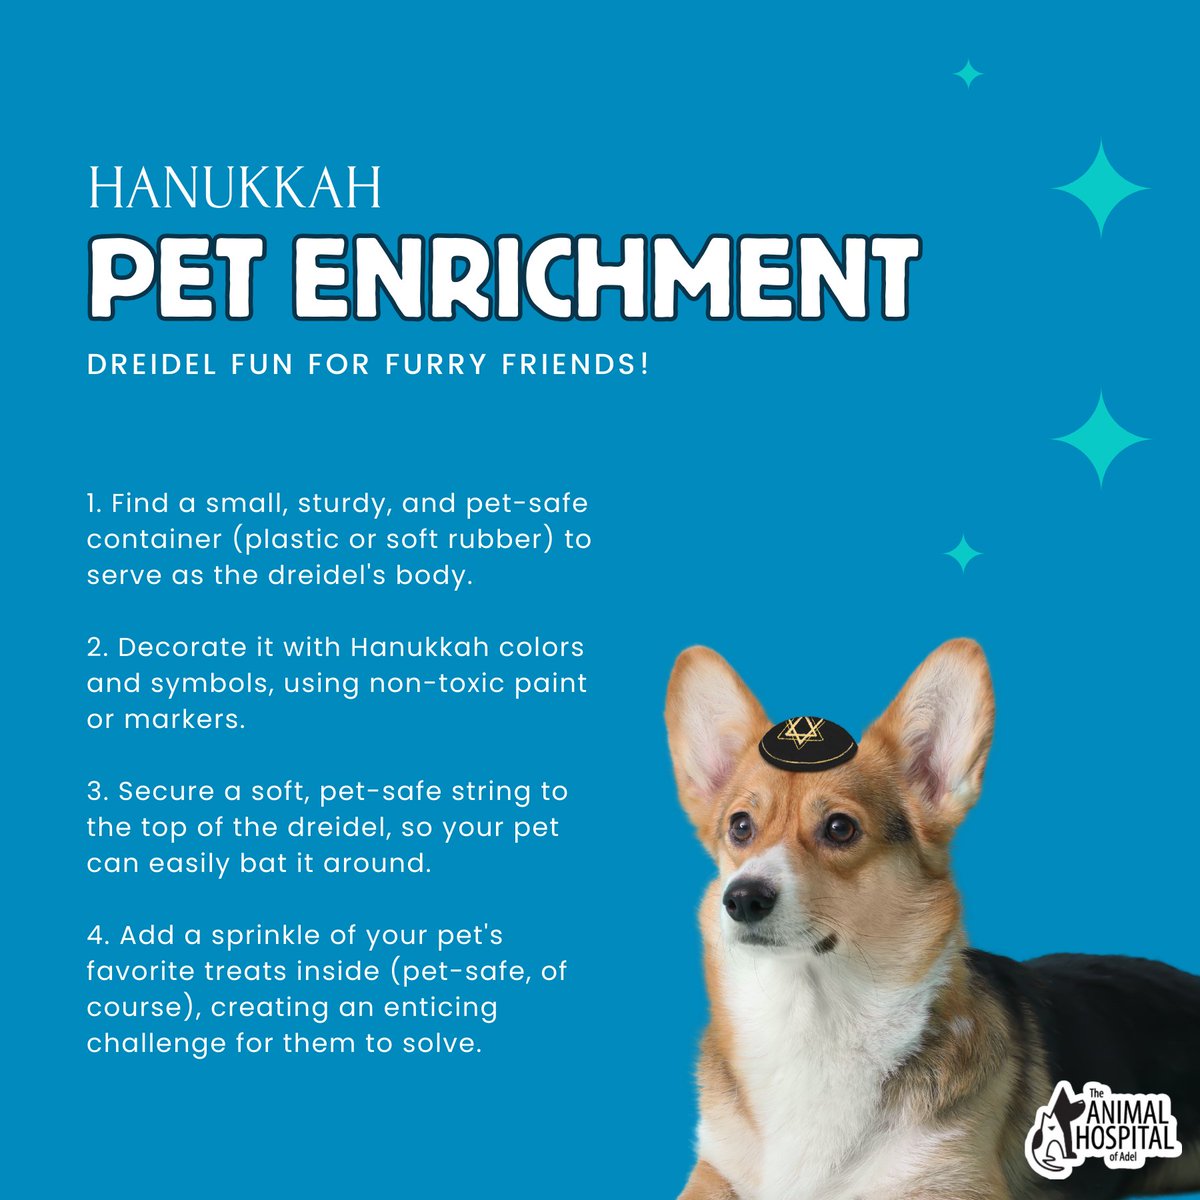 Happy Hanukkah! Try some Hanukkah-themed enrichment activities this holiday season. Try out this pet-safe DIY dreidel to keep them mentally engaged and happy. 🕯️🐕 #PetEnrichment